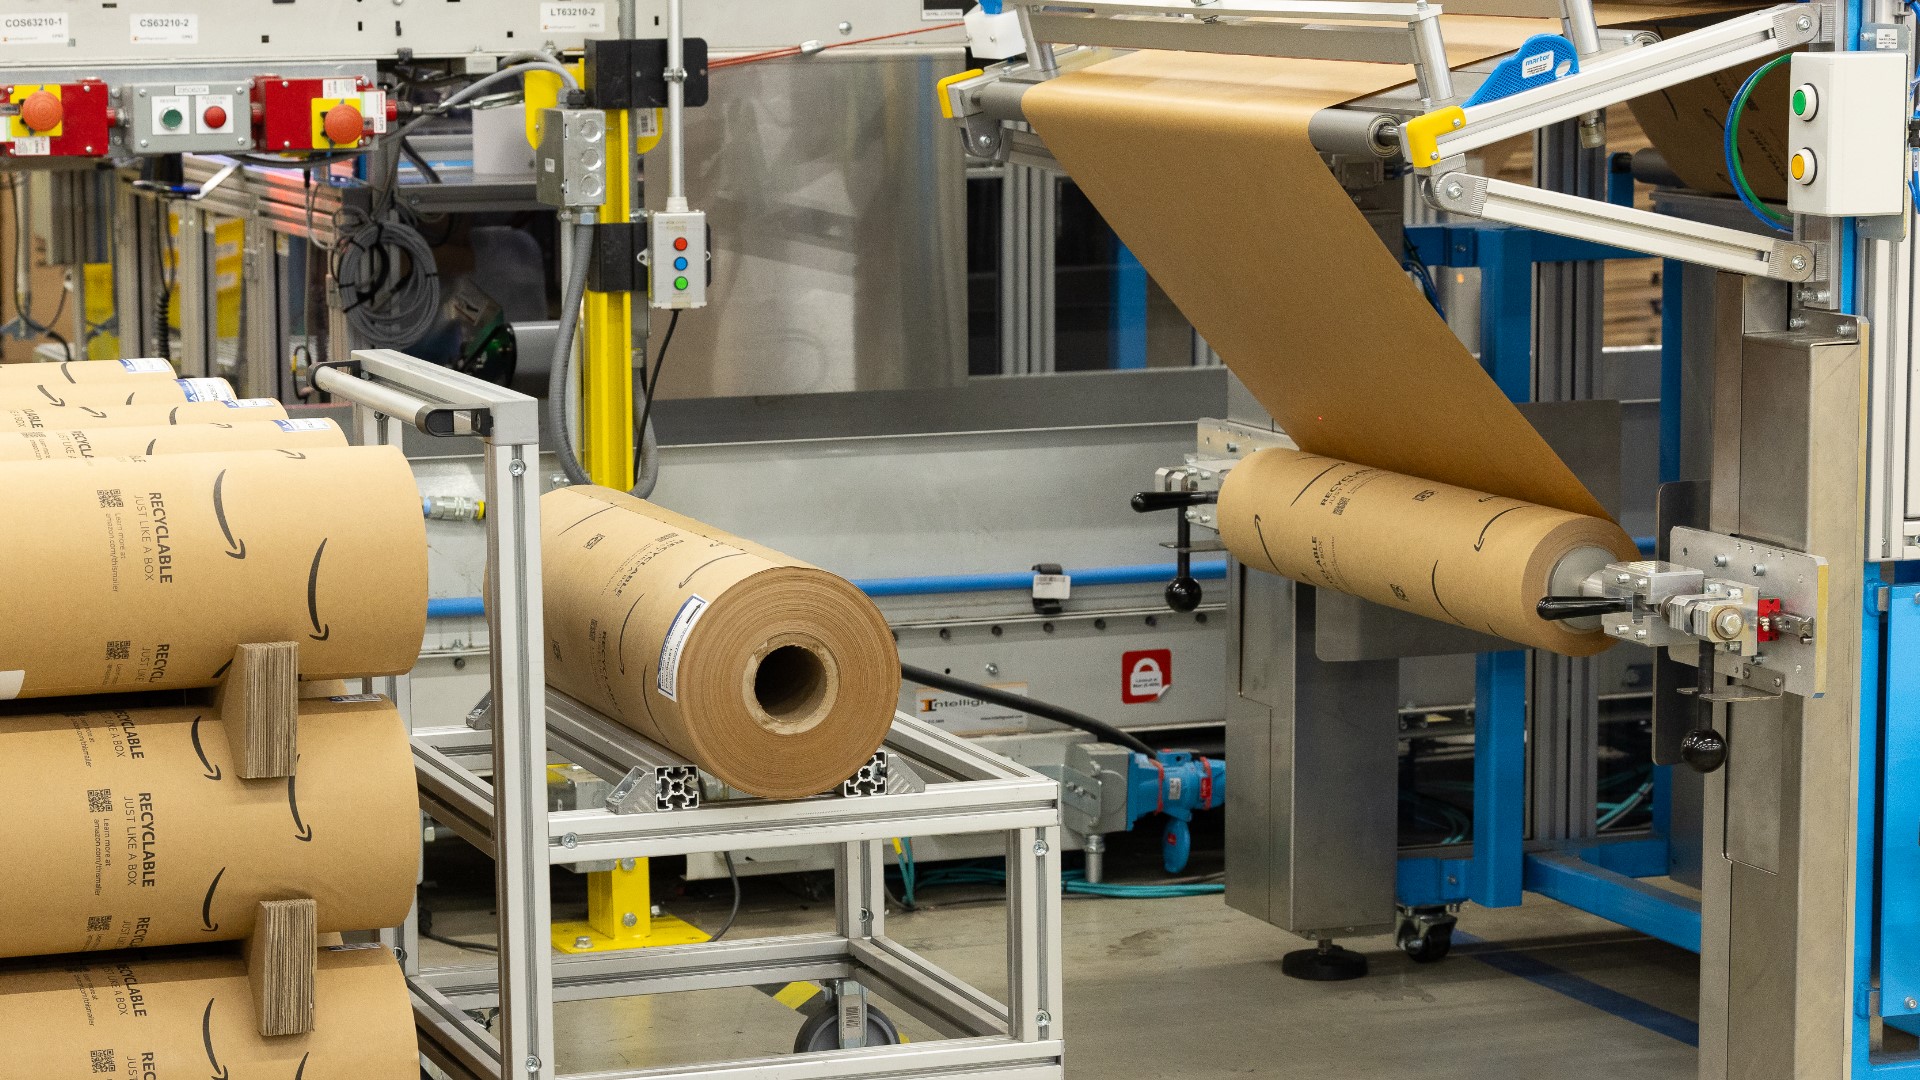 Amazon's fulfillment center in Euclid is the first in the U.S. to replace plastic delivery packaging with paper packaging solutions that are curbside recyclable.